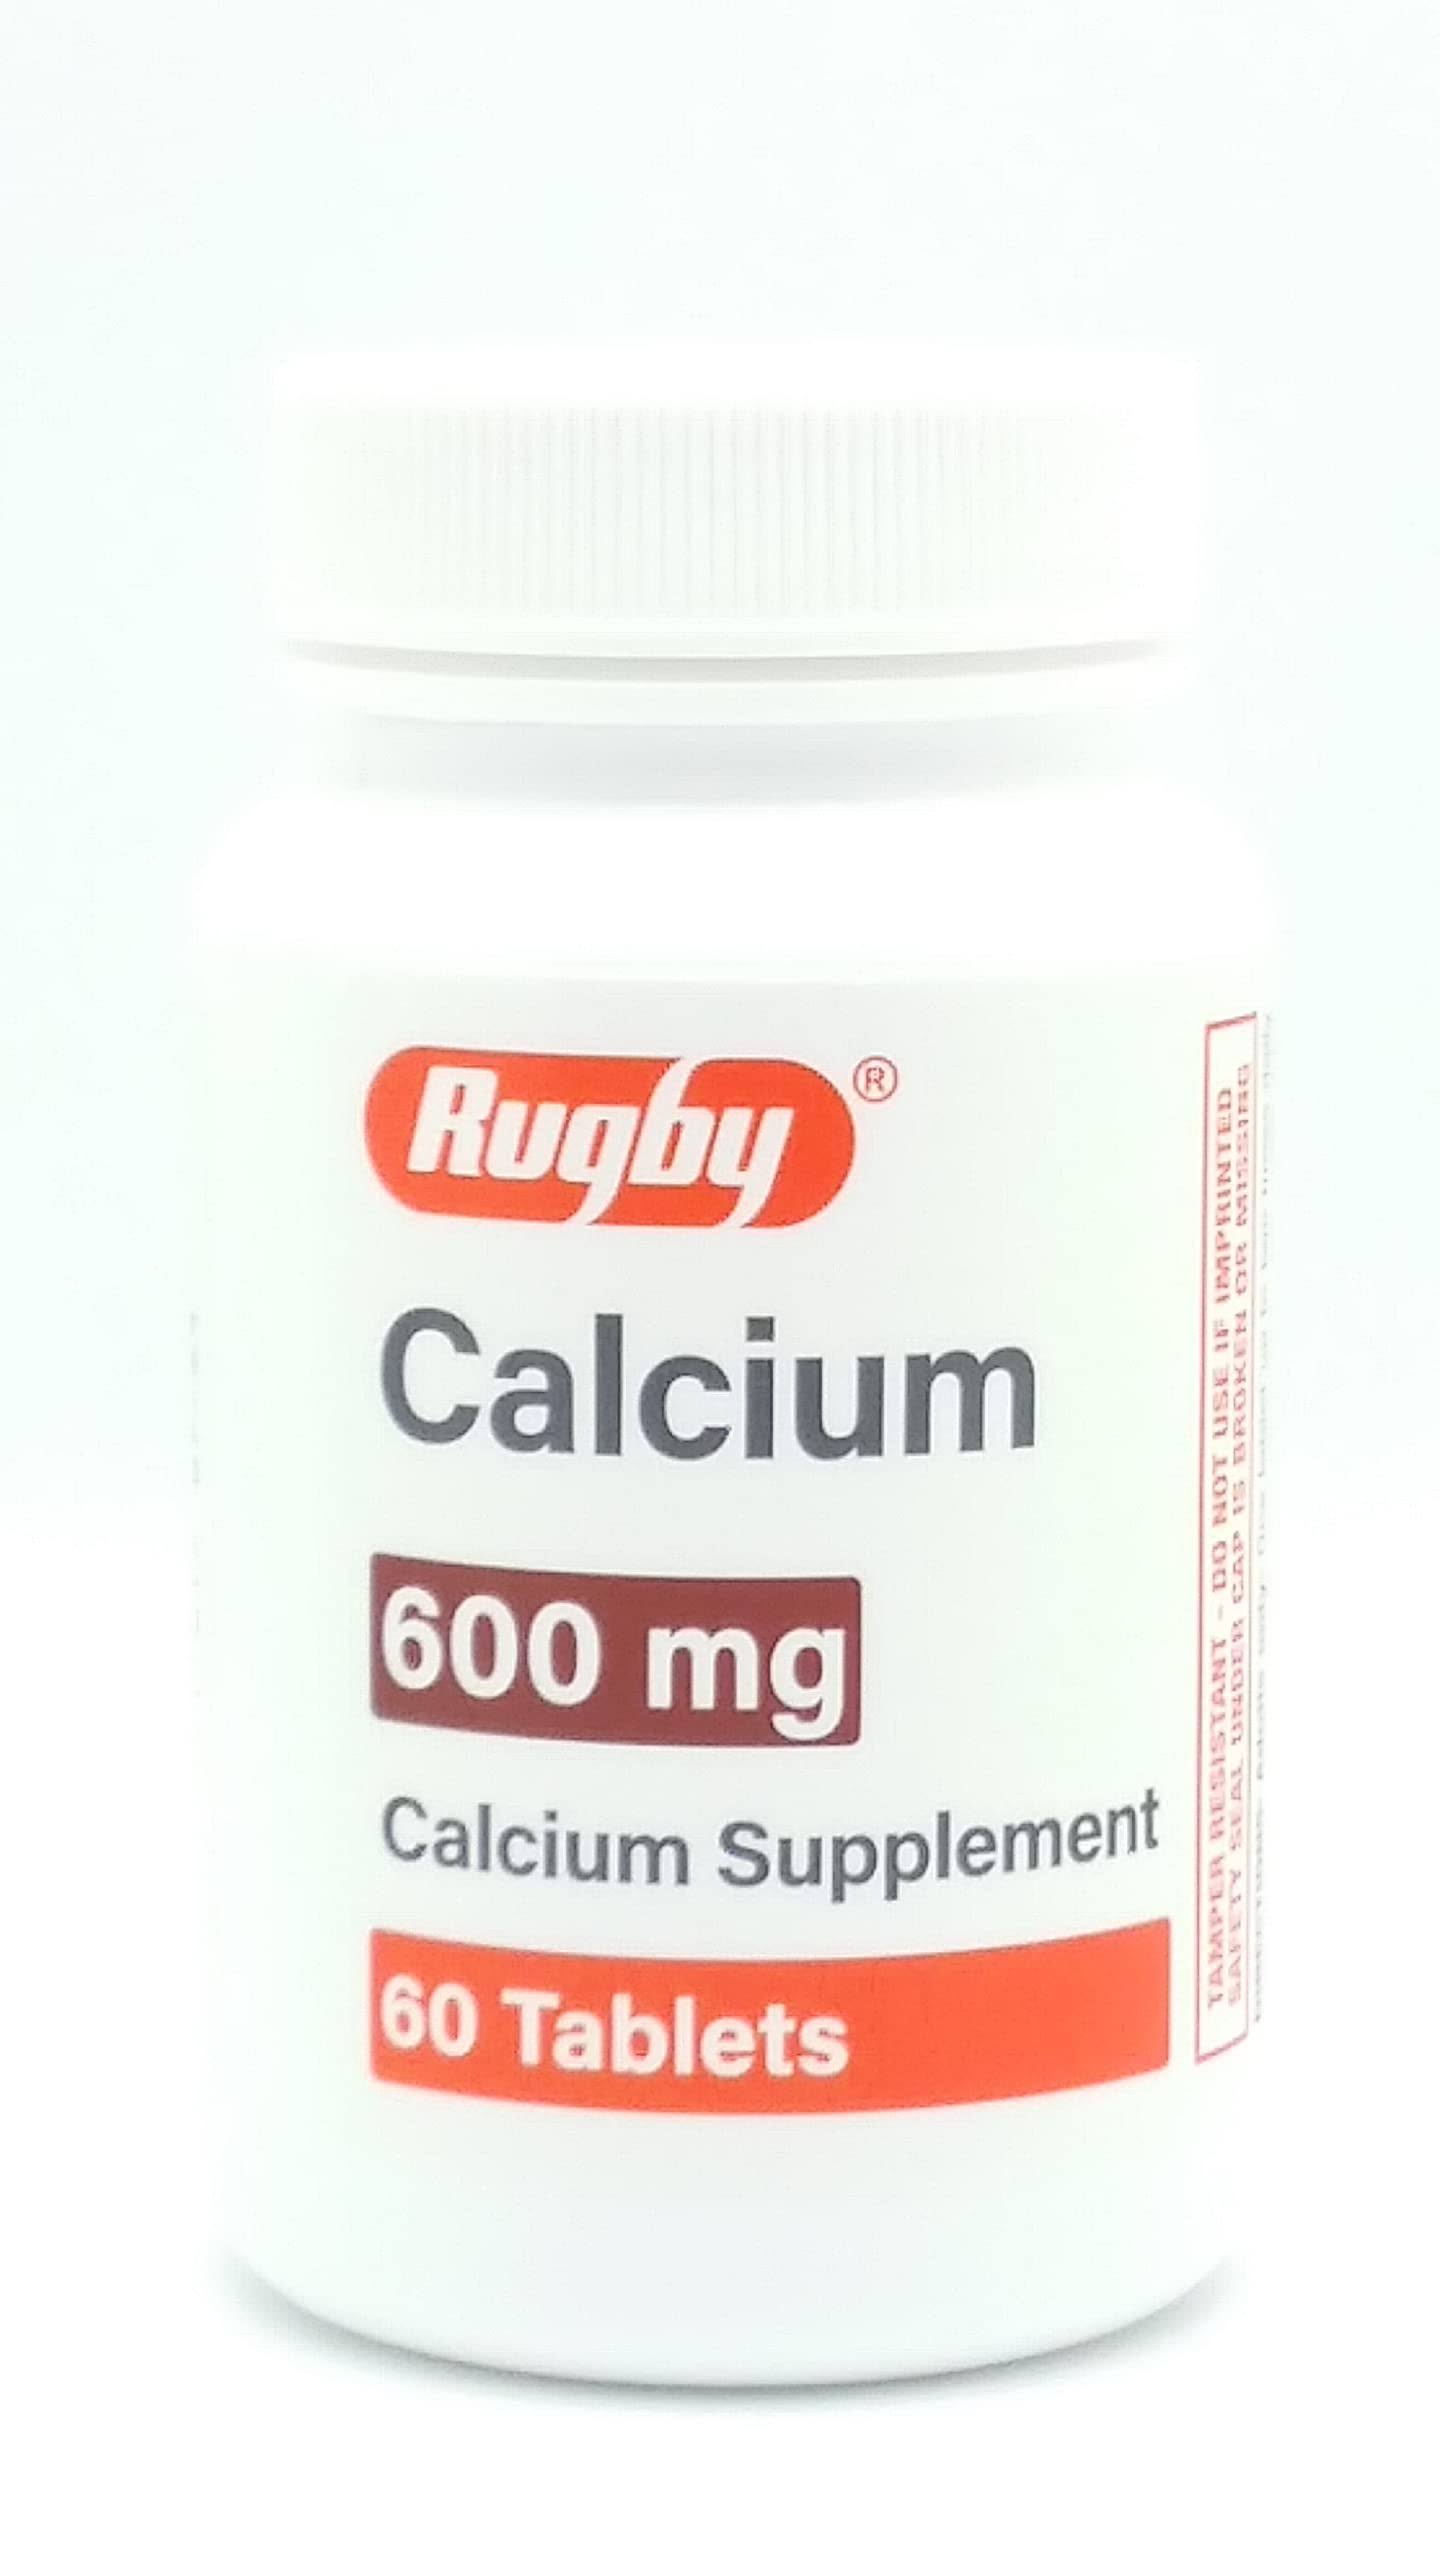 Rugby Calcium Supplement, 600 mg 60 Tablets Each (1 Pack)